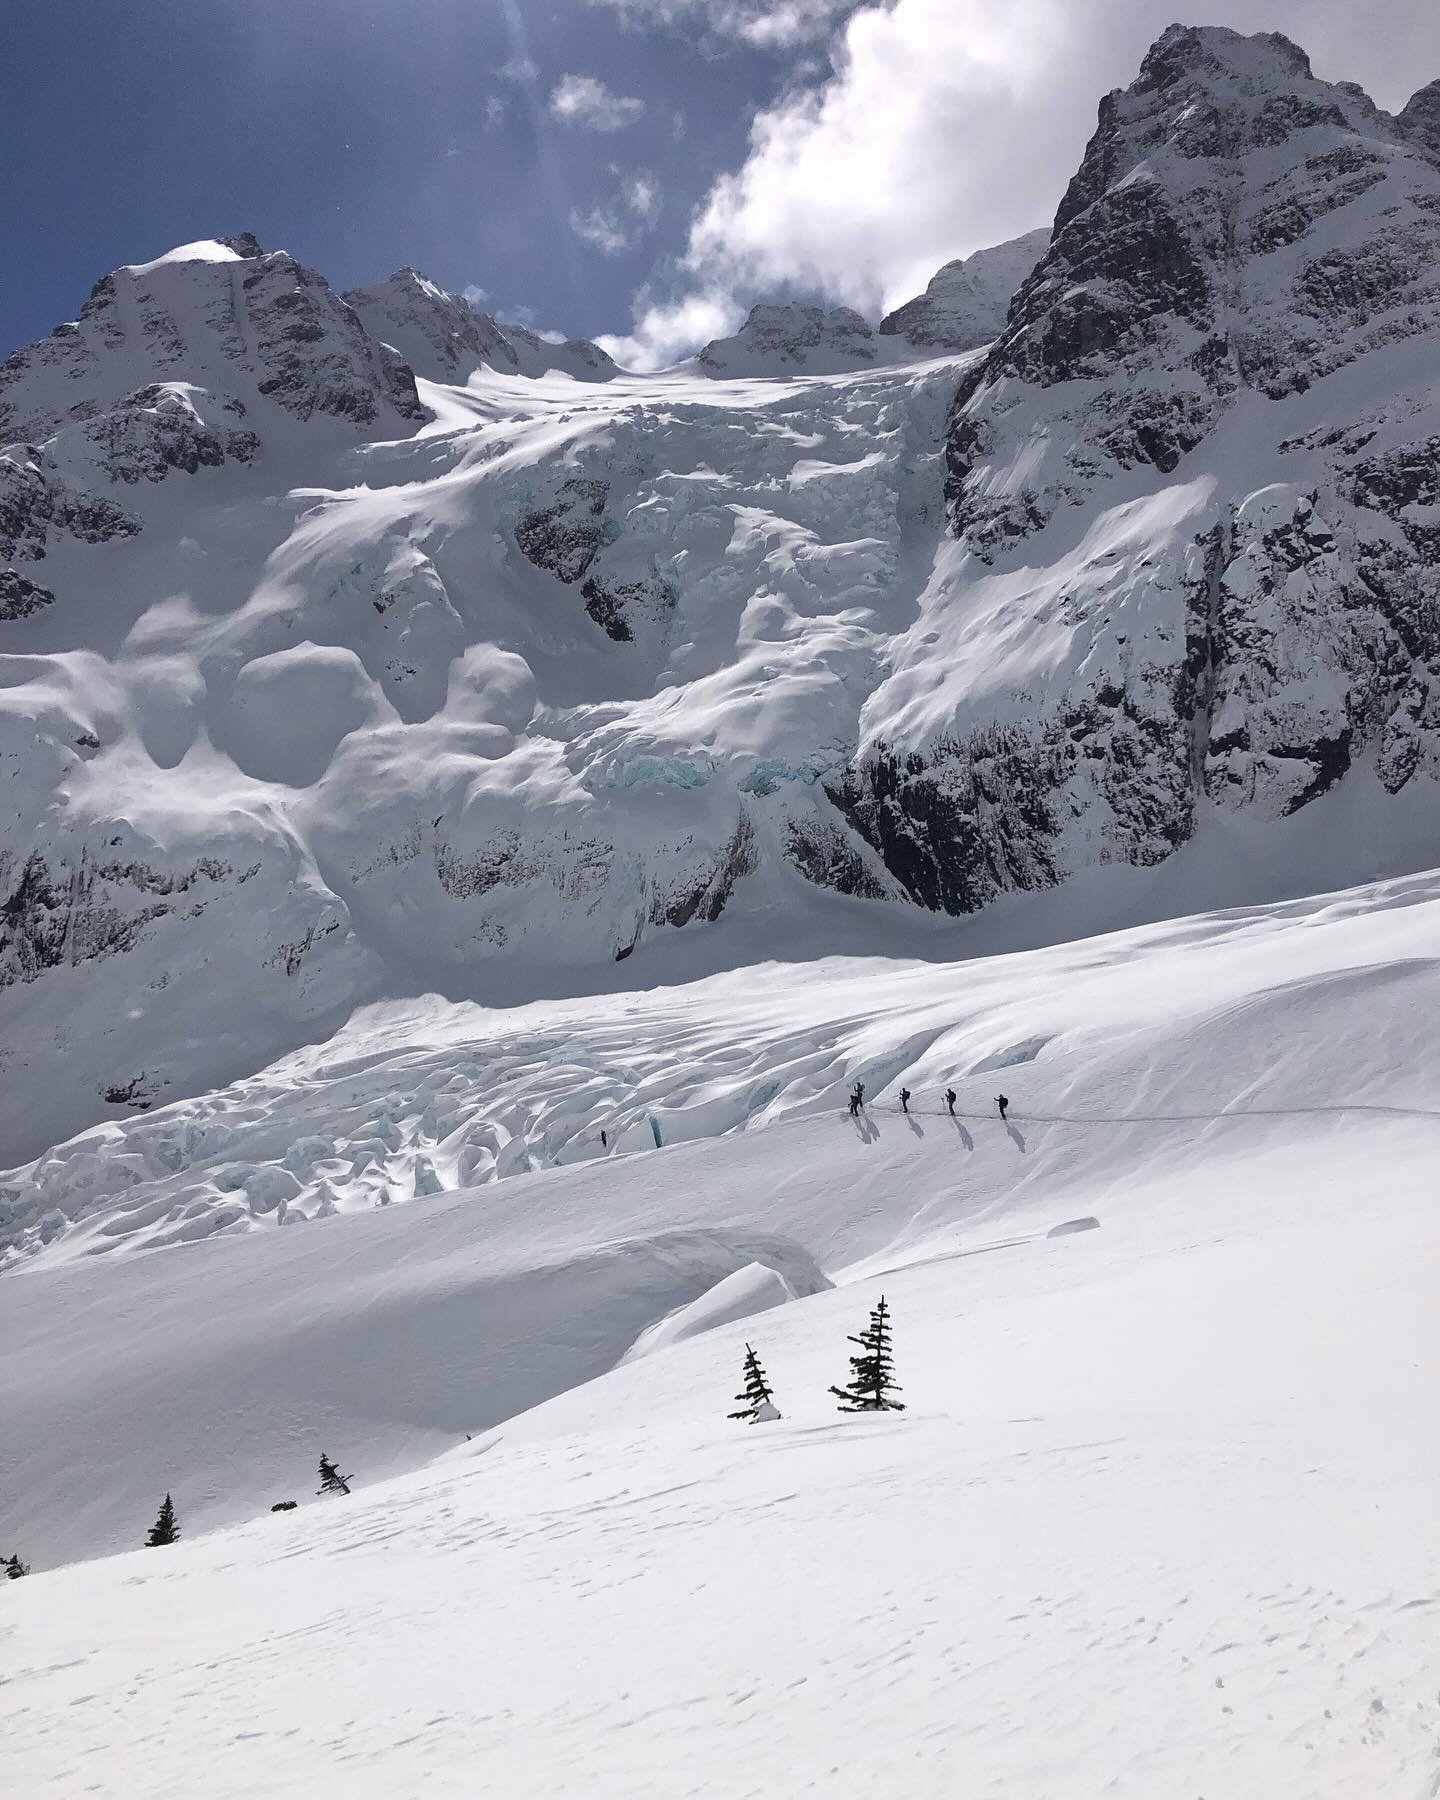 Burnie Glacier Chalet: The Place

The Howson Range is steep, dramatic, tumultuous and inspiring sub-range located in the Northern BC coast ranges. Far from the beaten path, its history is made of stories of First Nations, pioneers, explorers and pres